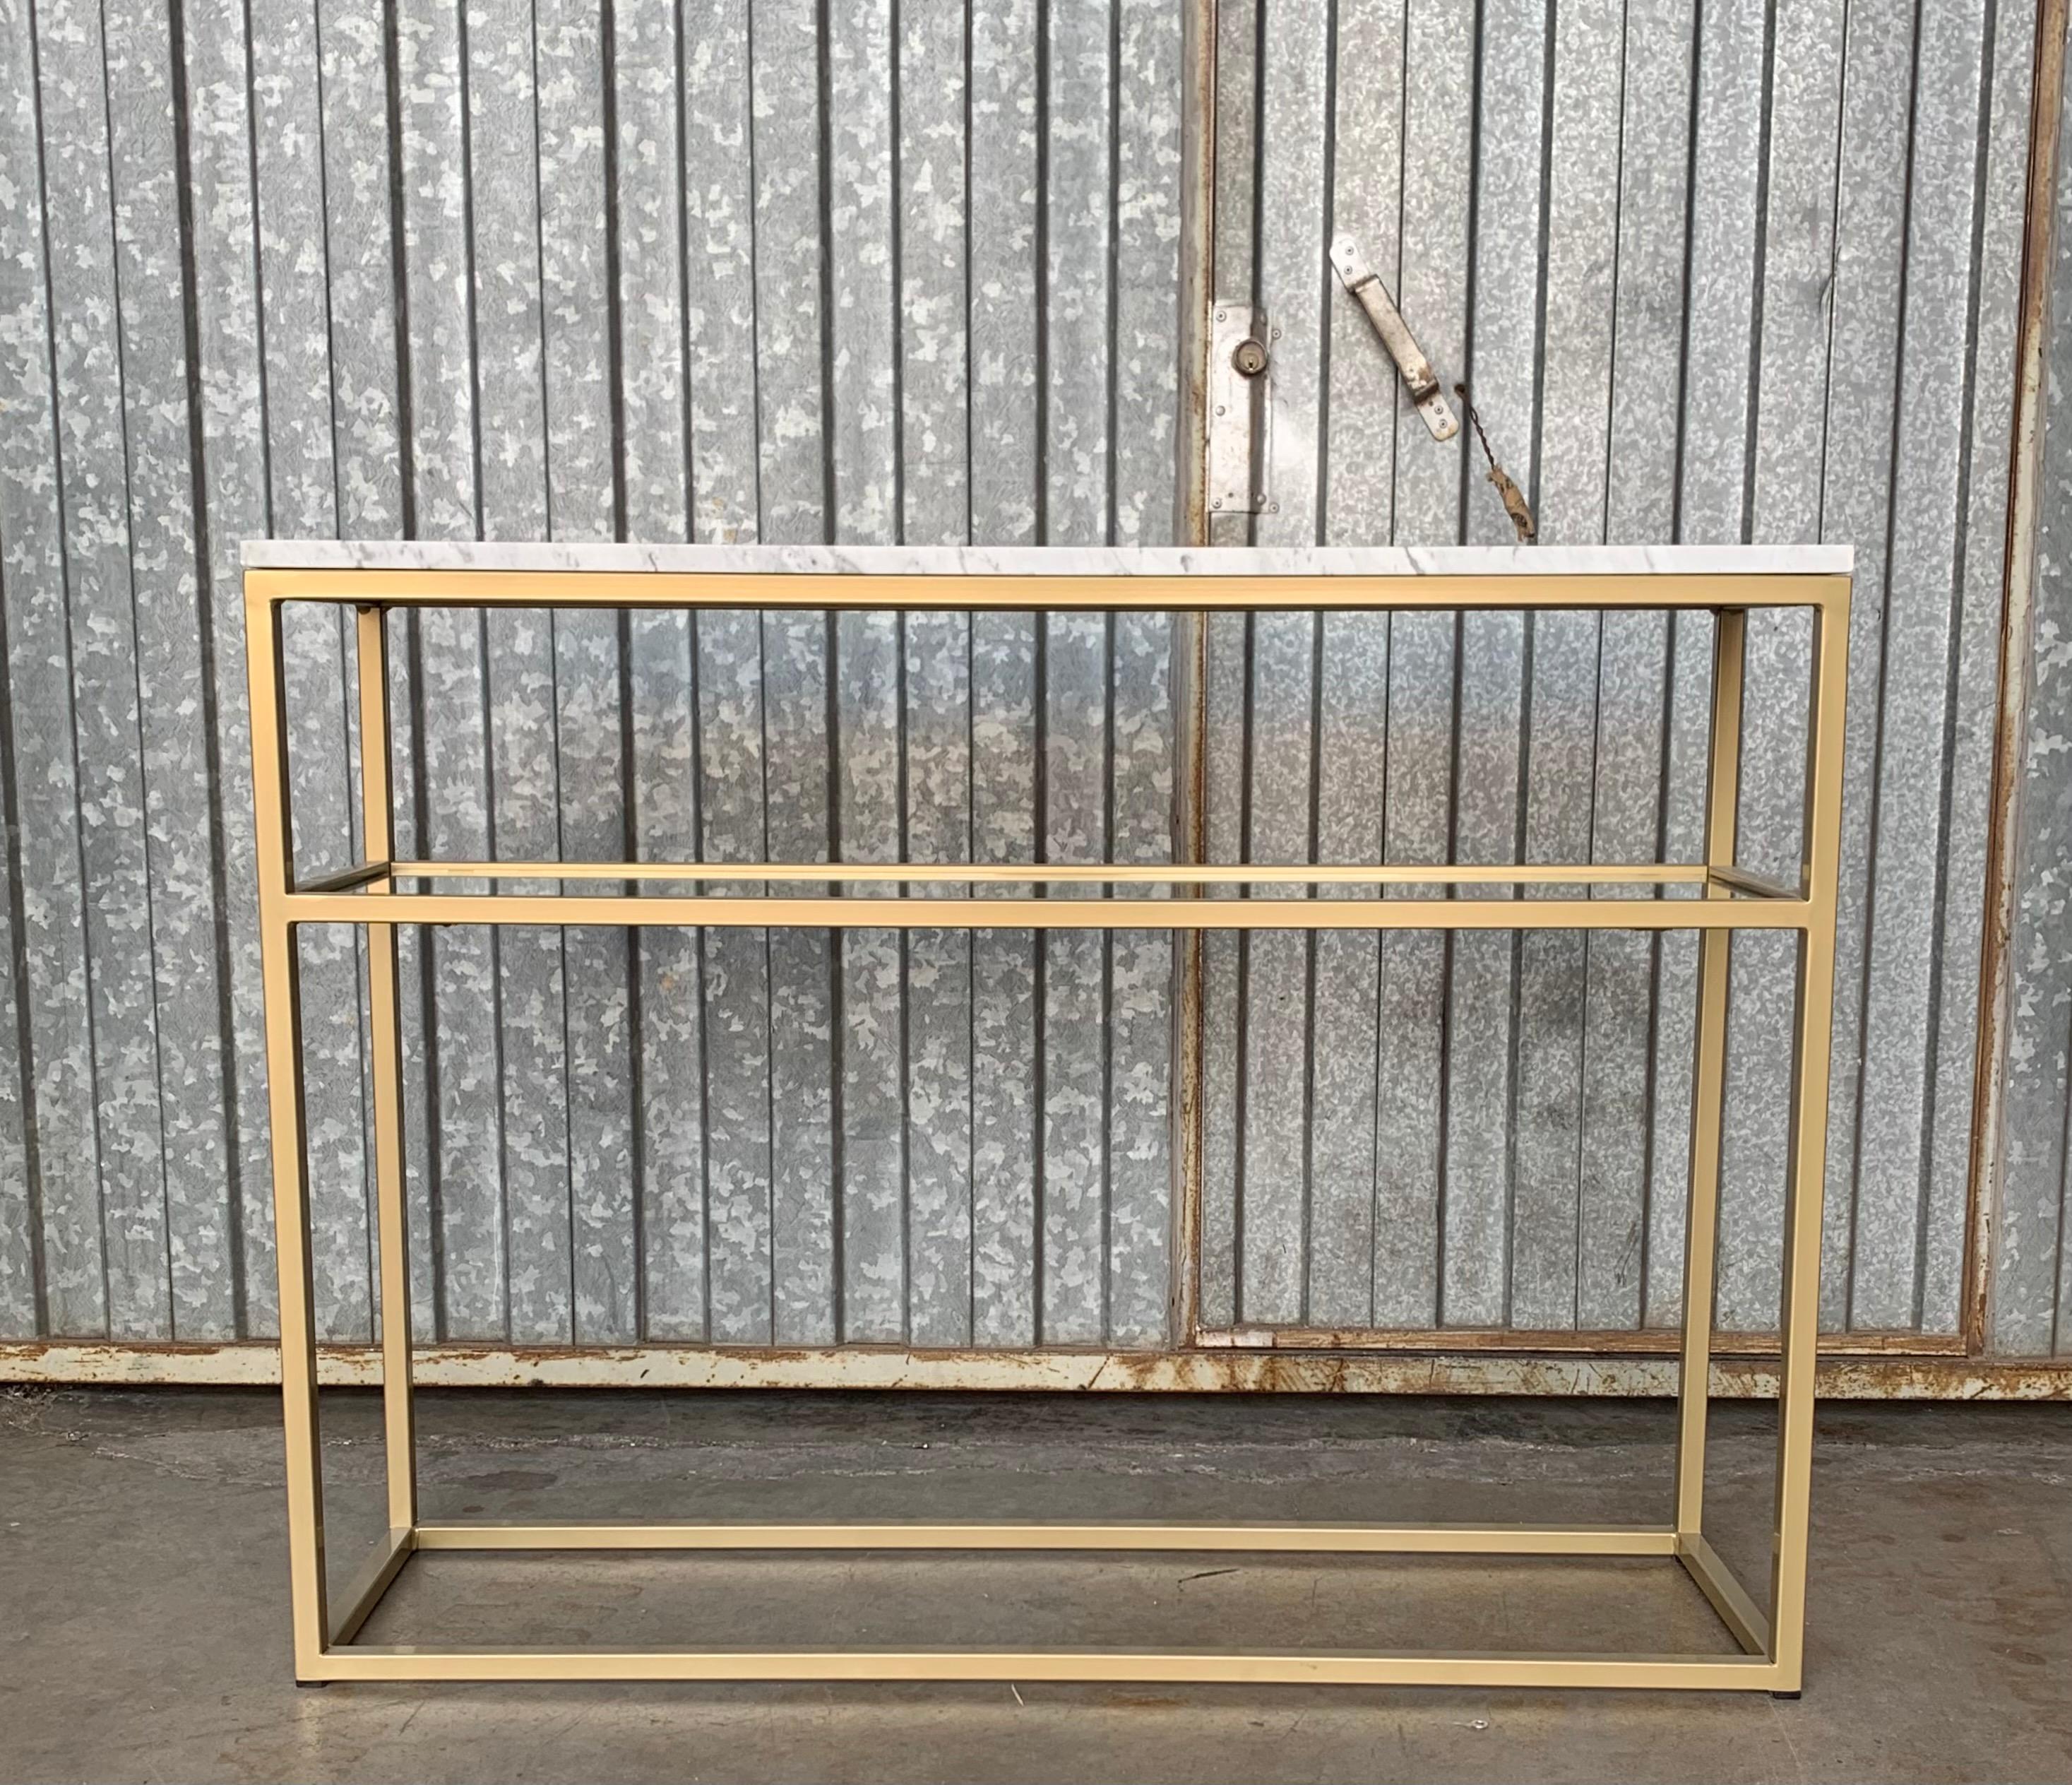 New gilded iron console table with marble top and glass shelve. 
You can customize and choose the color, the top and shelve ( glass, wood, marble , iron )

Galvanized metal rod shelving with epoxy powder coating.